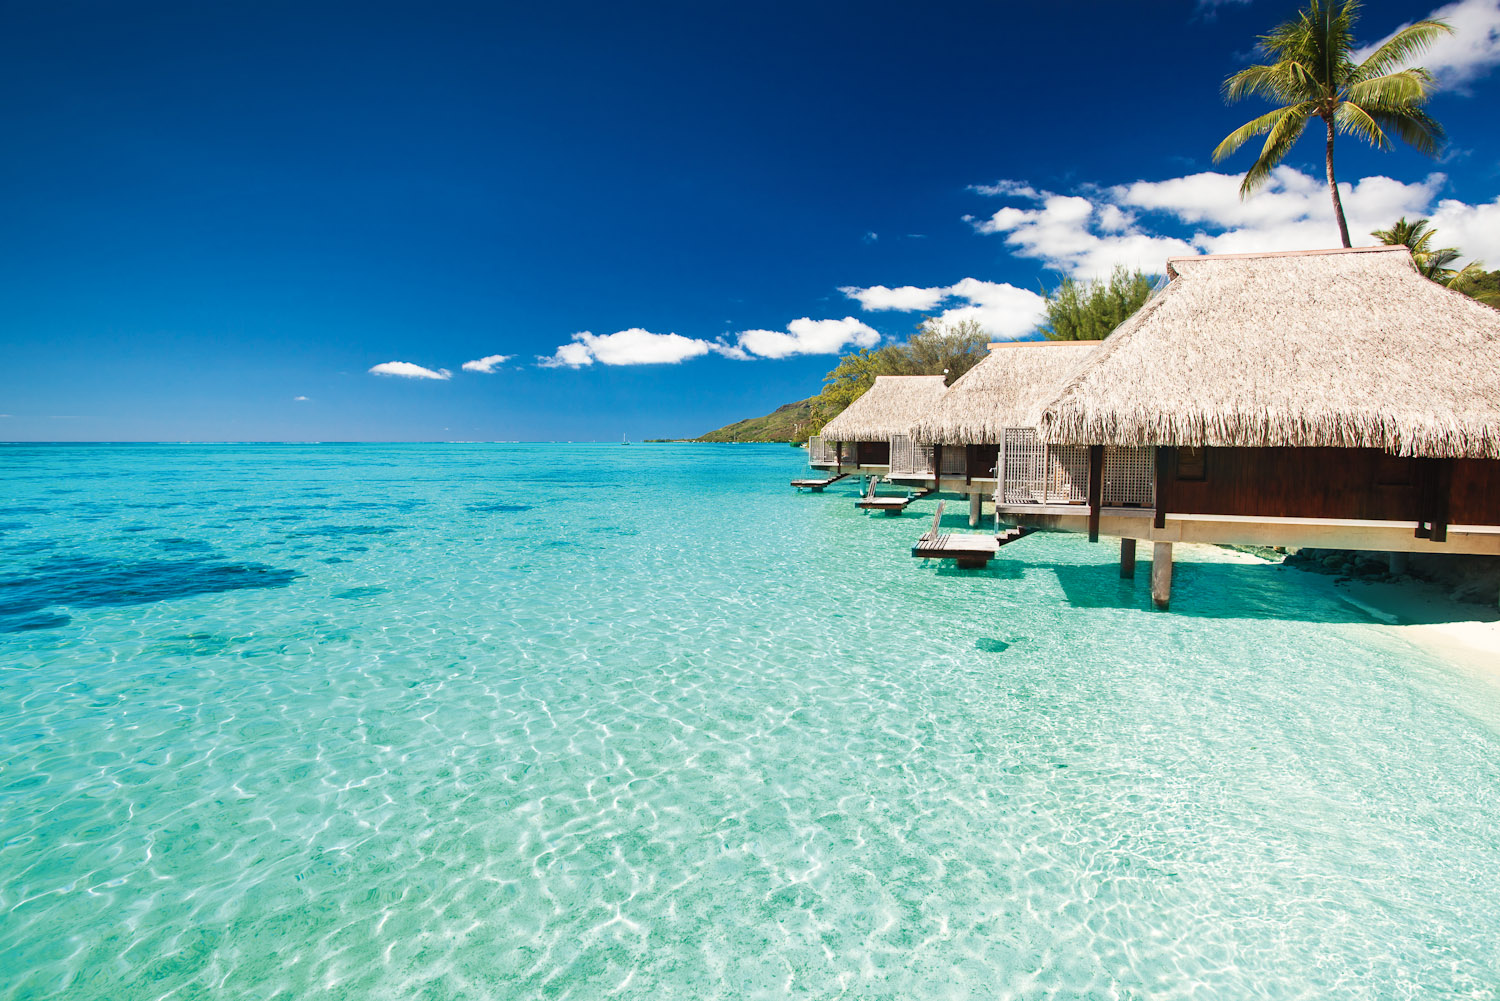 The Maldives was voted the ultimate dream destination in International Traveller's Readers' Choice Awards 2015.